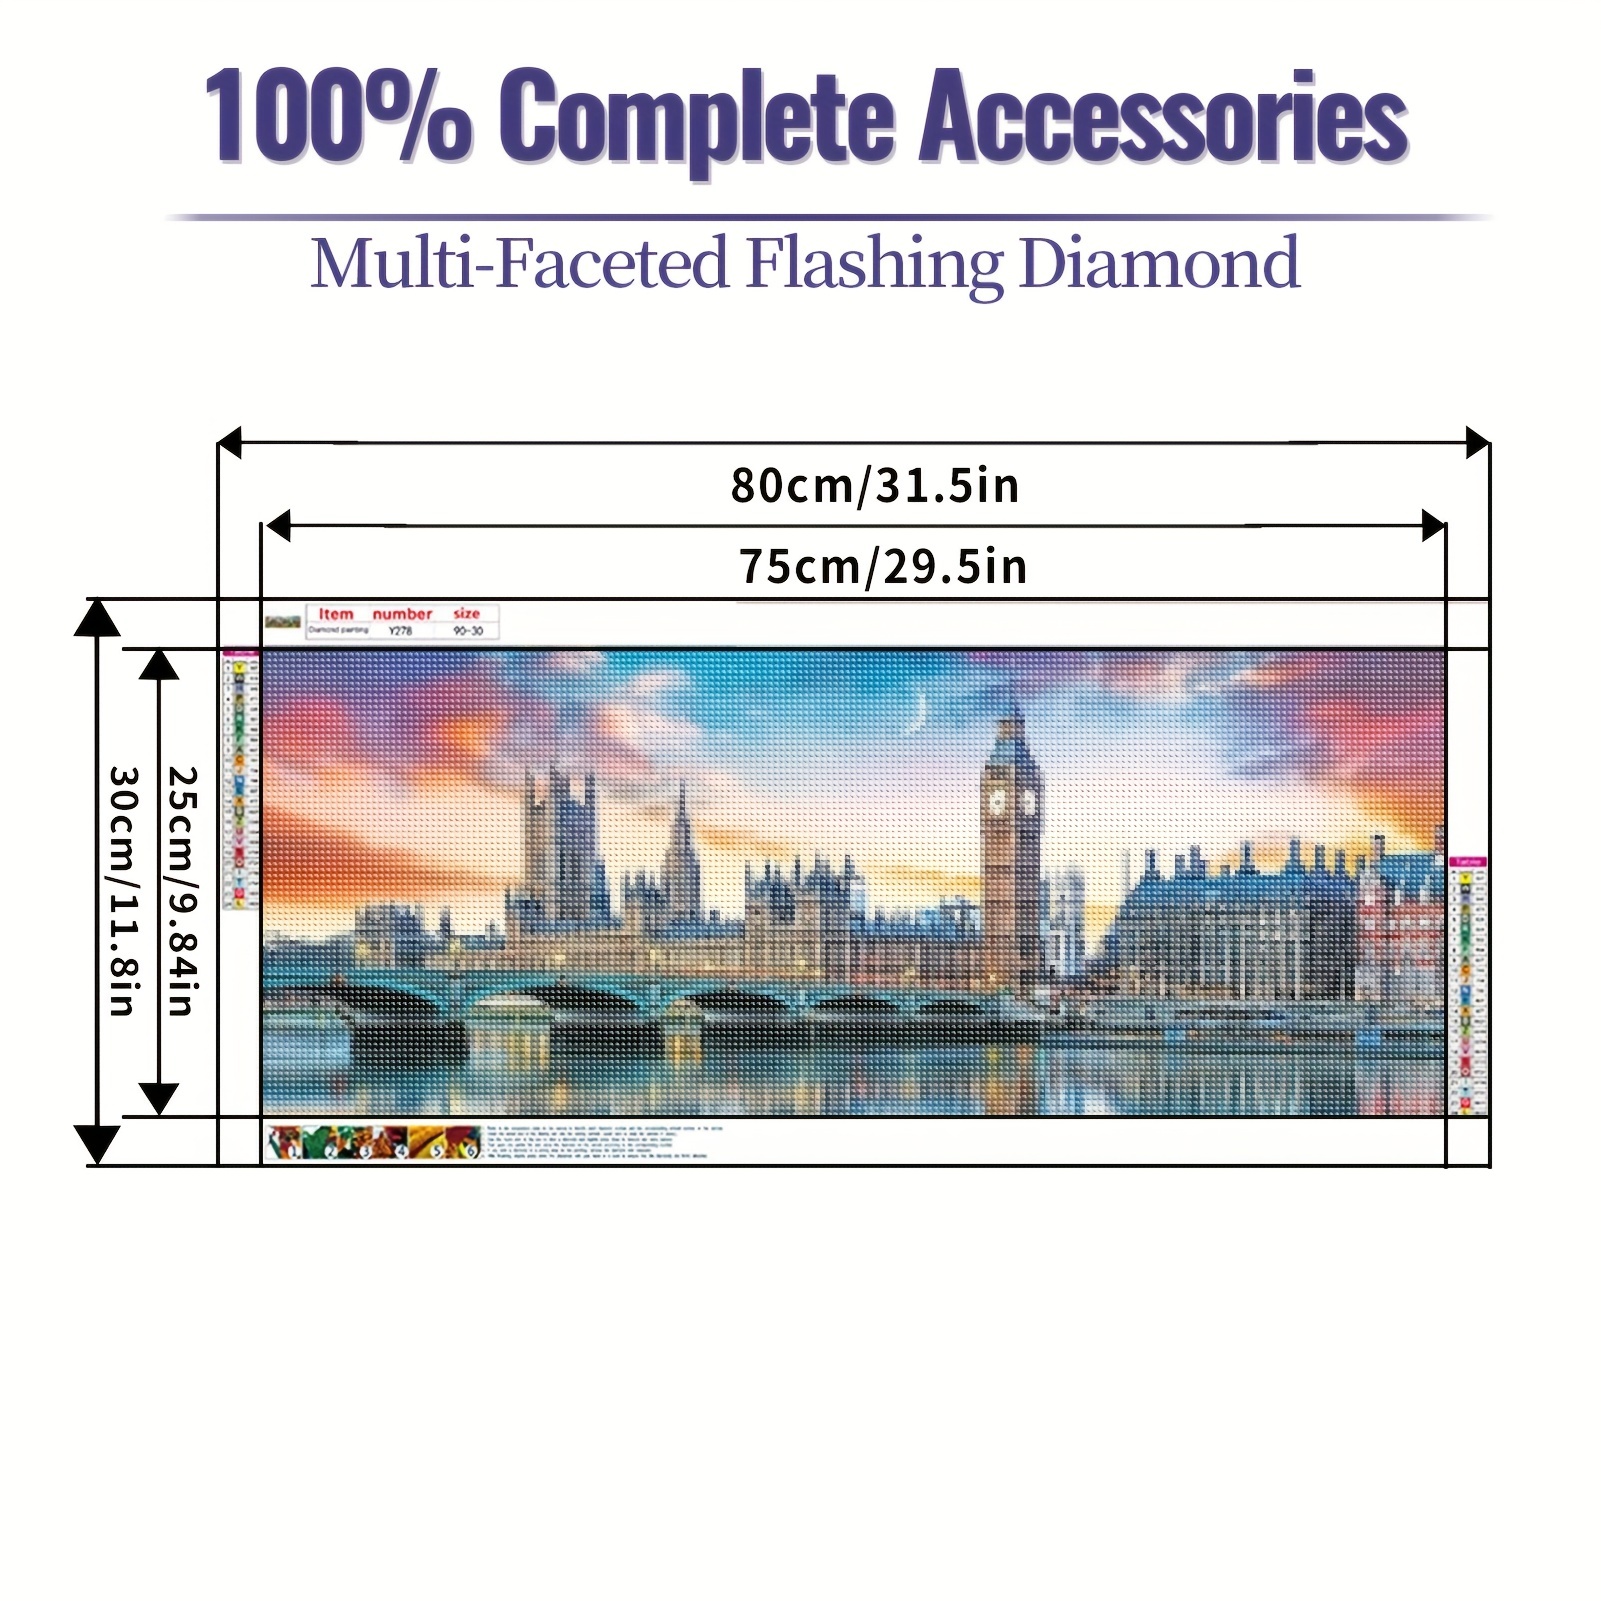 5D DIY Large Diamond Painting Kits For Adults 11.8x31.5inch/30x80cm Big Ben  Round Full Diamond Diamond Art Kits Picture By Number Kits For Wall Decor